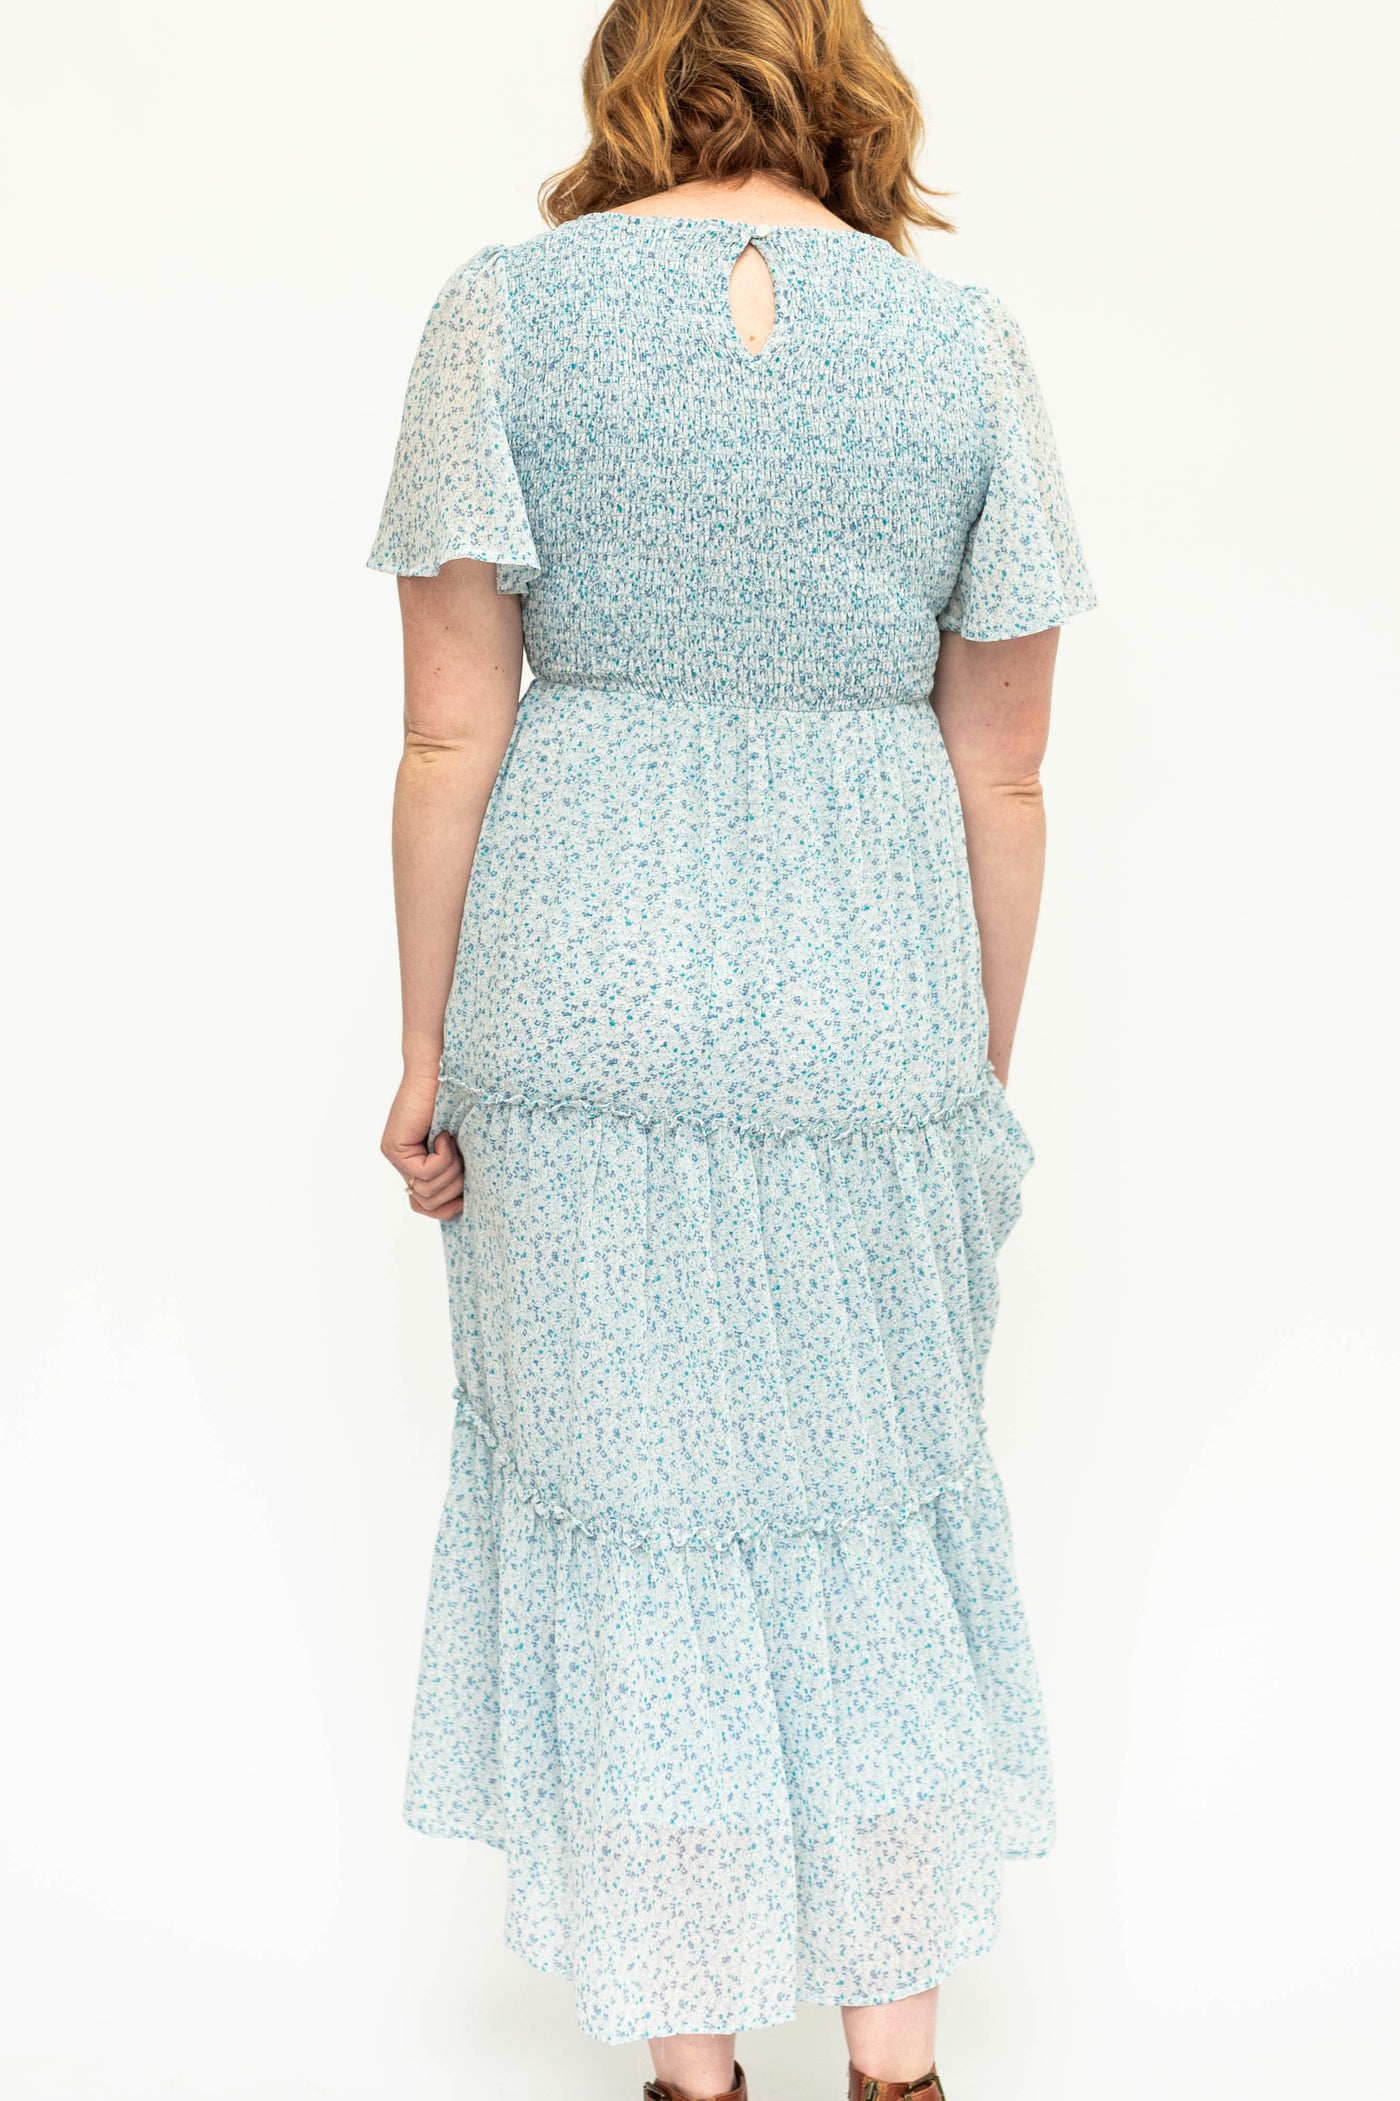 Back view of sky blue sheer fabric with lining, tiered, short sleeve floral dress with smocked bodice.